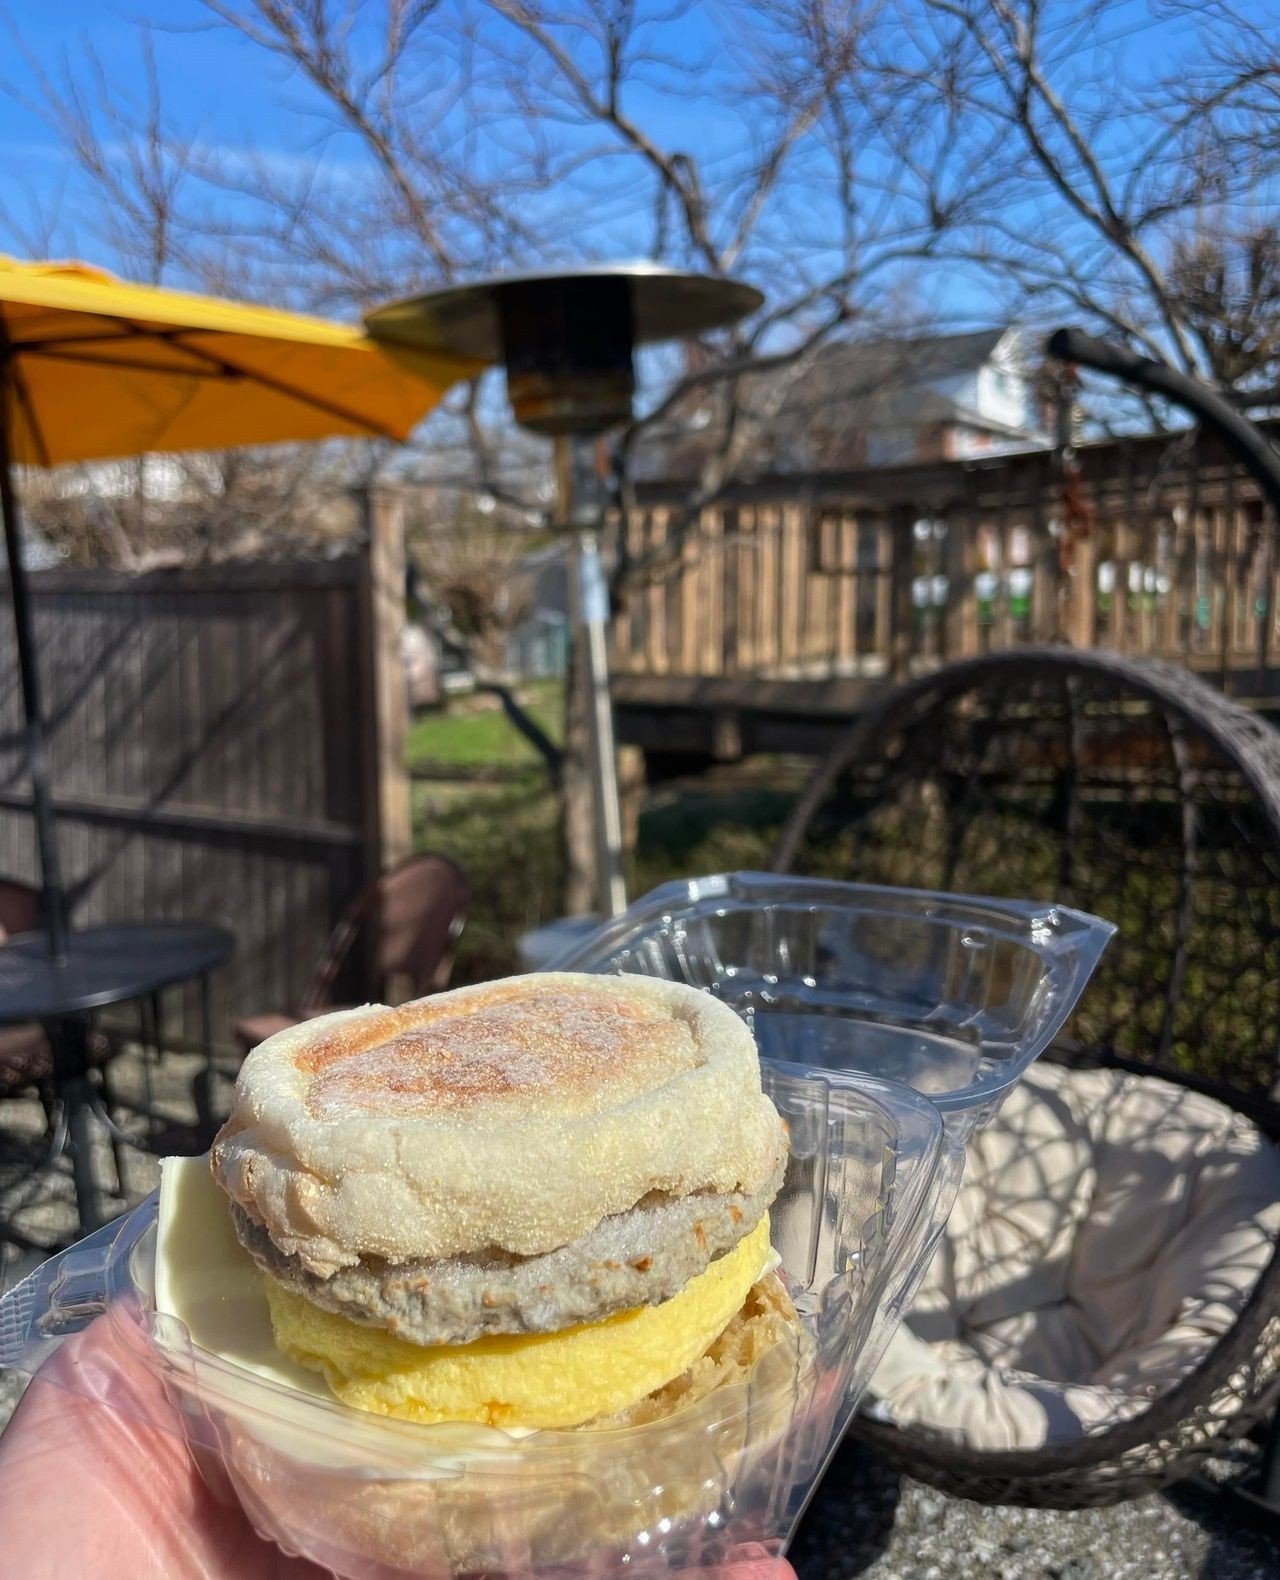 National English Muffin Day?!??! Sign us up! Indulge in one of our yummy breakfast sandwiches on a classic English Muffin!⁠
⁠
#englishmuffin #breakfastsandwich #drinkfeine ⁠
#breakfast #bakery #coffee #brunch